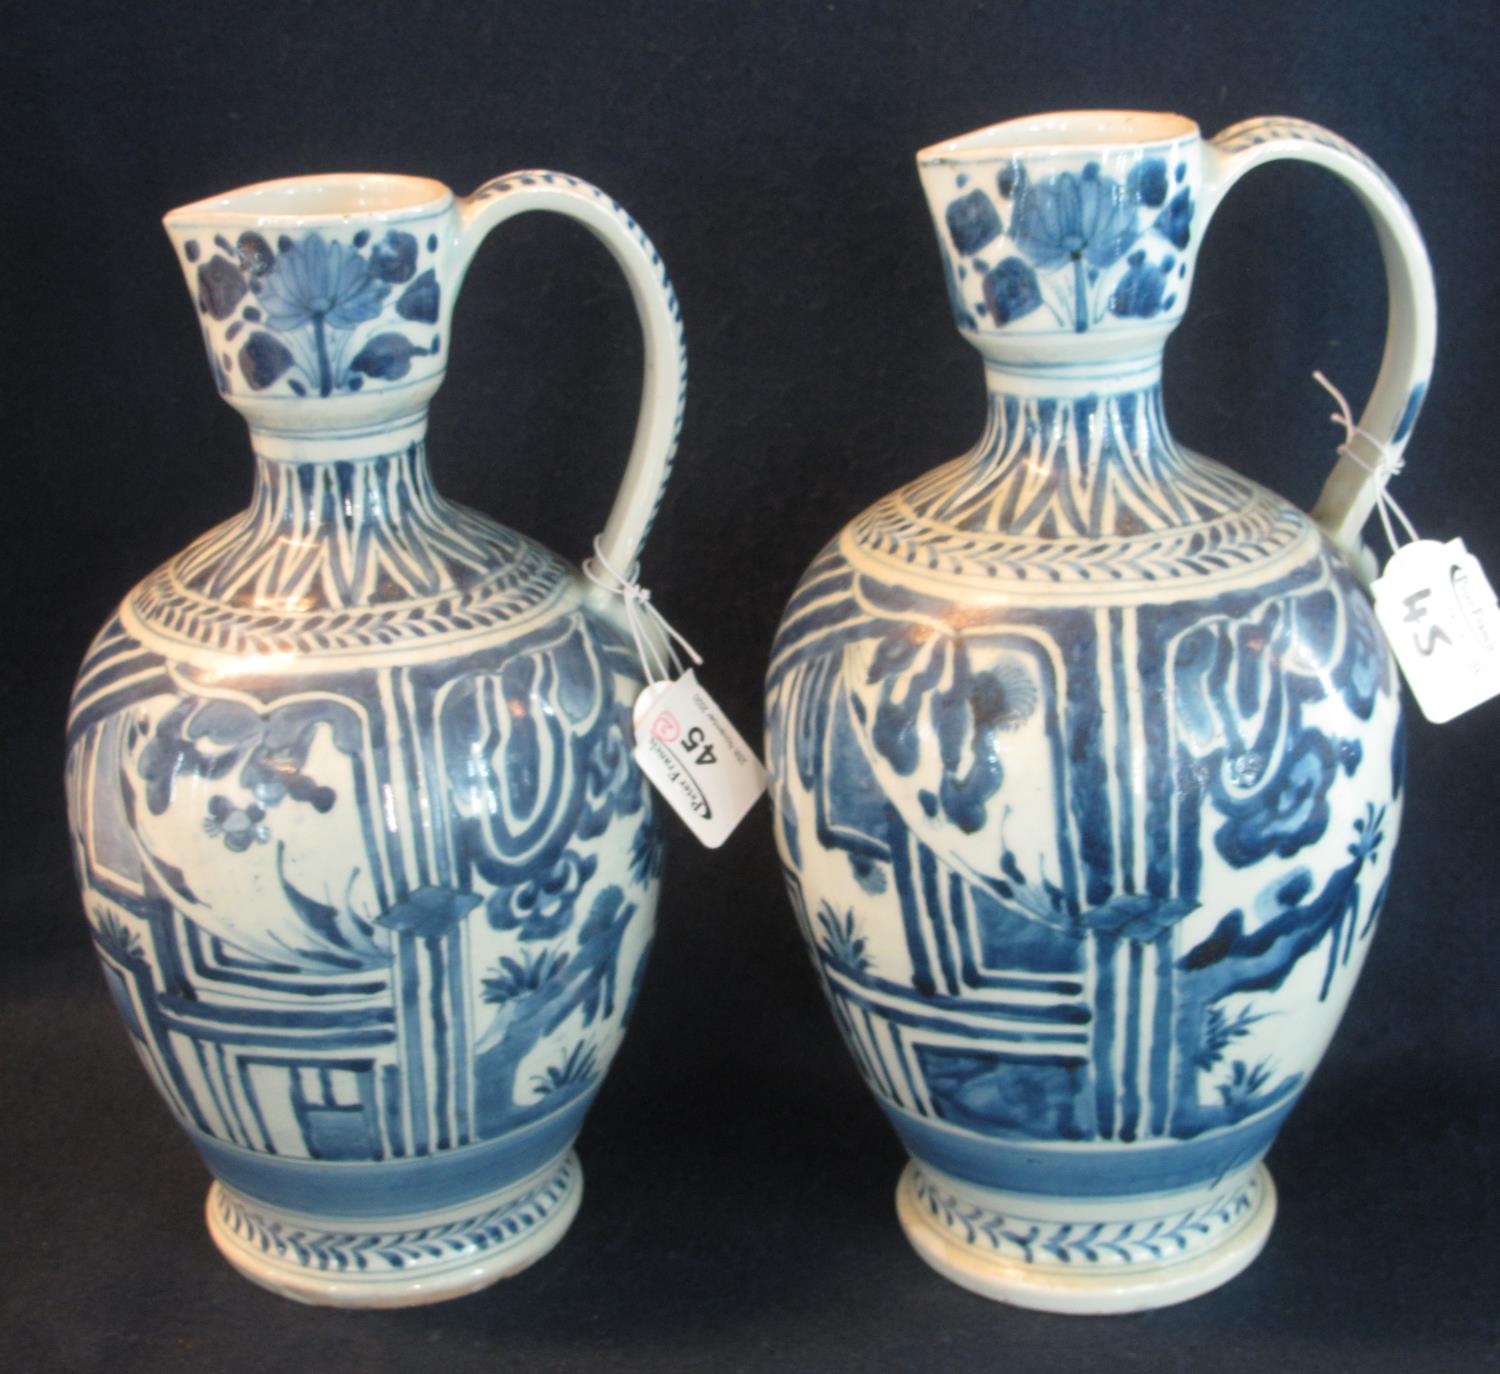 Two similar Japanese Arita porcelain baluster shaped wine jugs with loop handles, overall